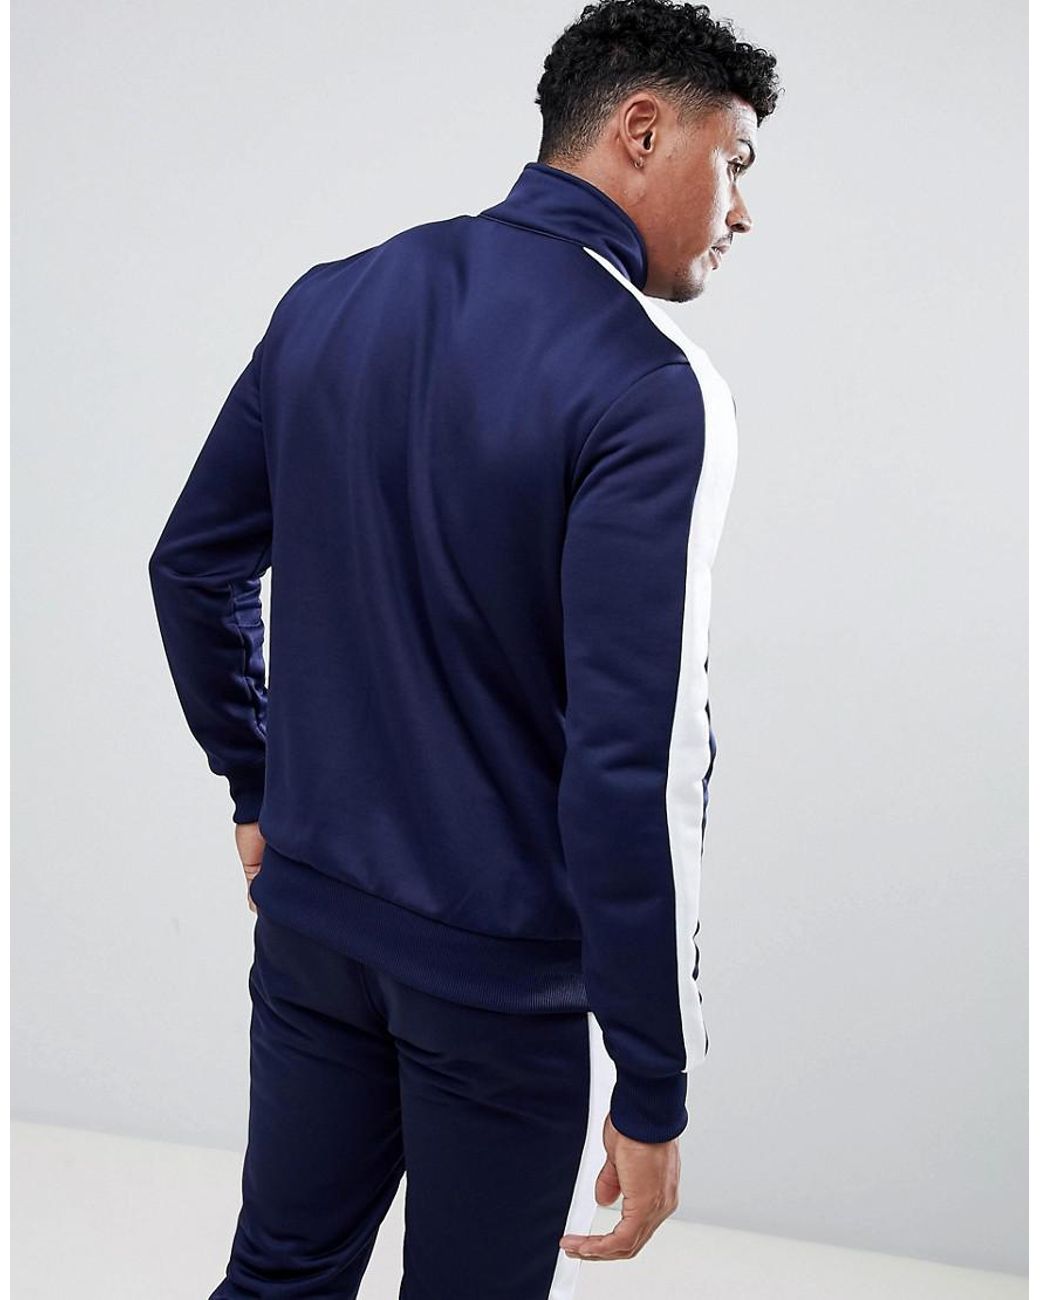 PUMA Archive T7 Track Jacket In Navy 57265806 in Blue for Men 